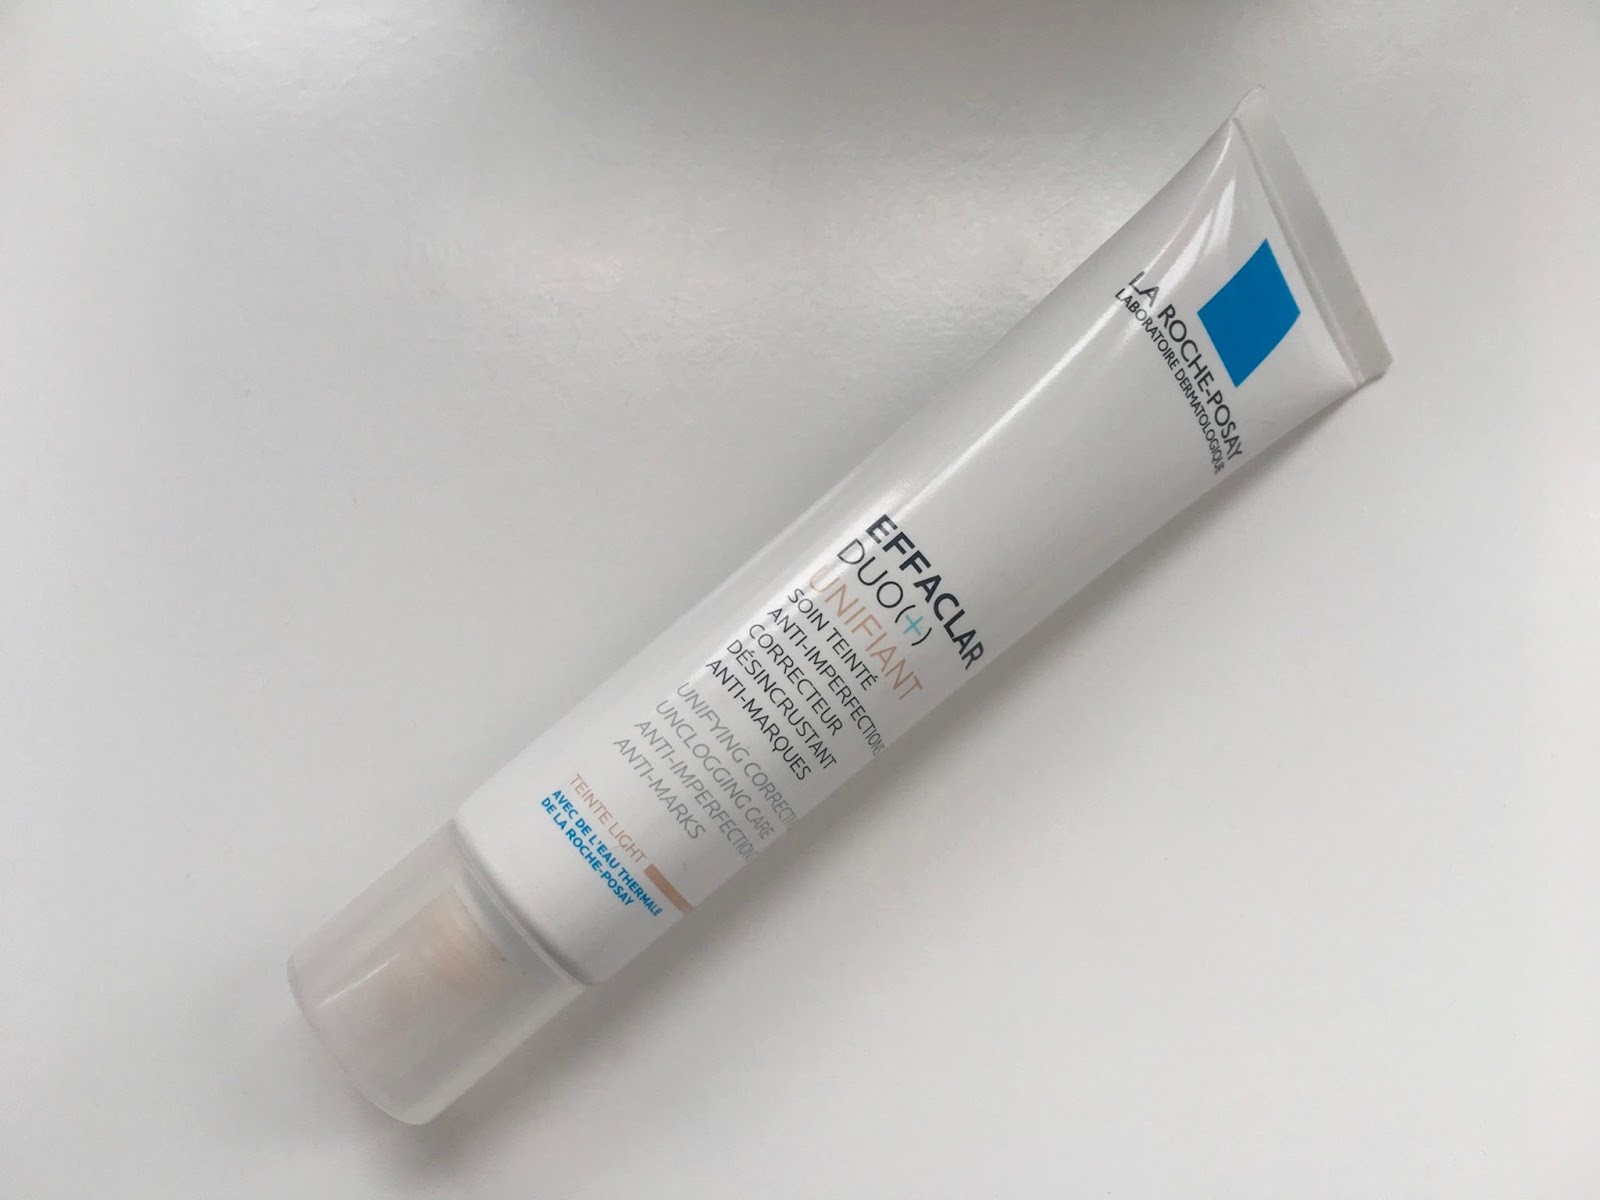 Effaclar Duo (+) Unifiant by La Roche-Posay by Laura Lewis